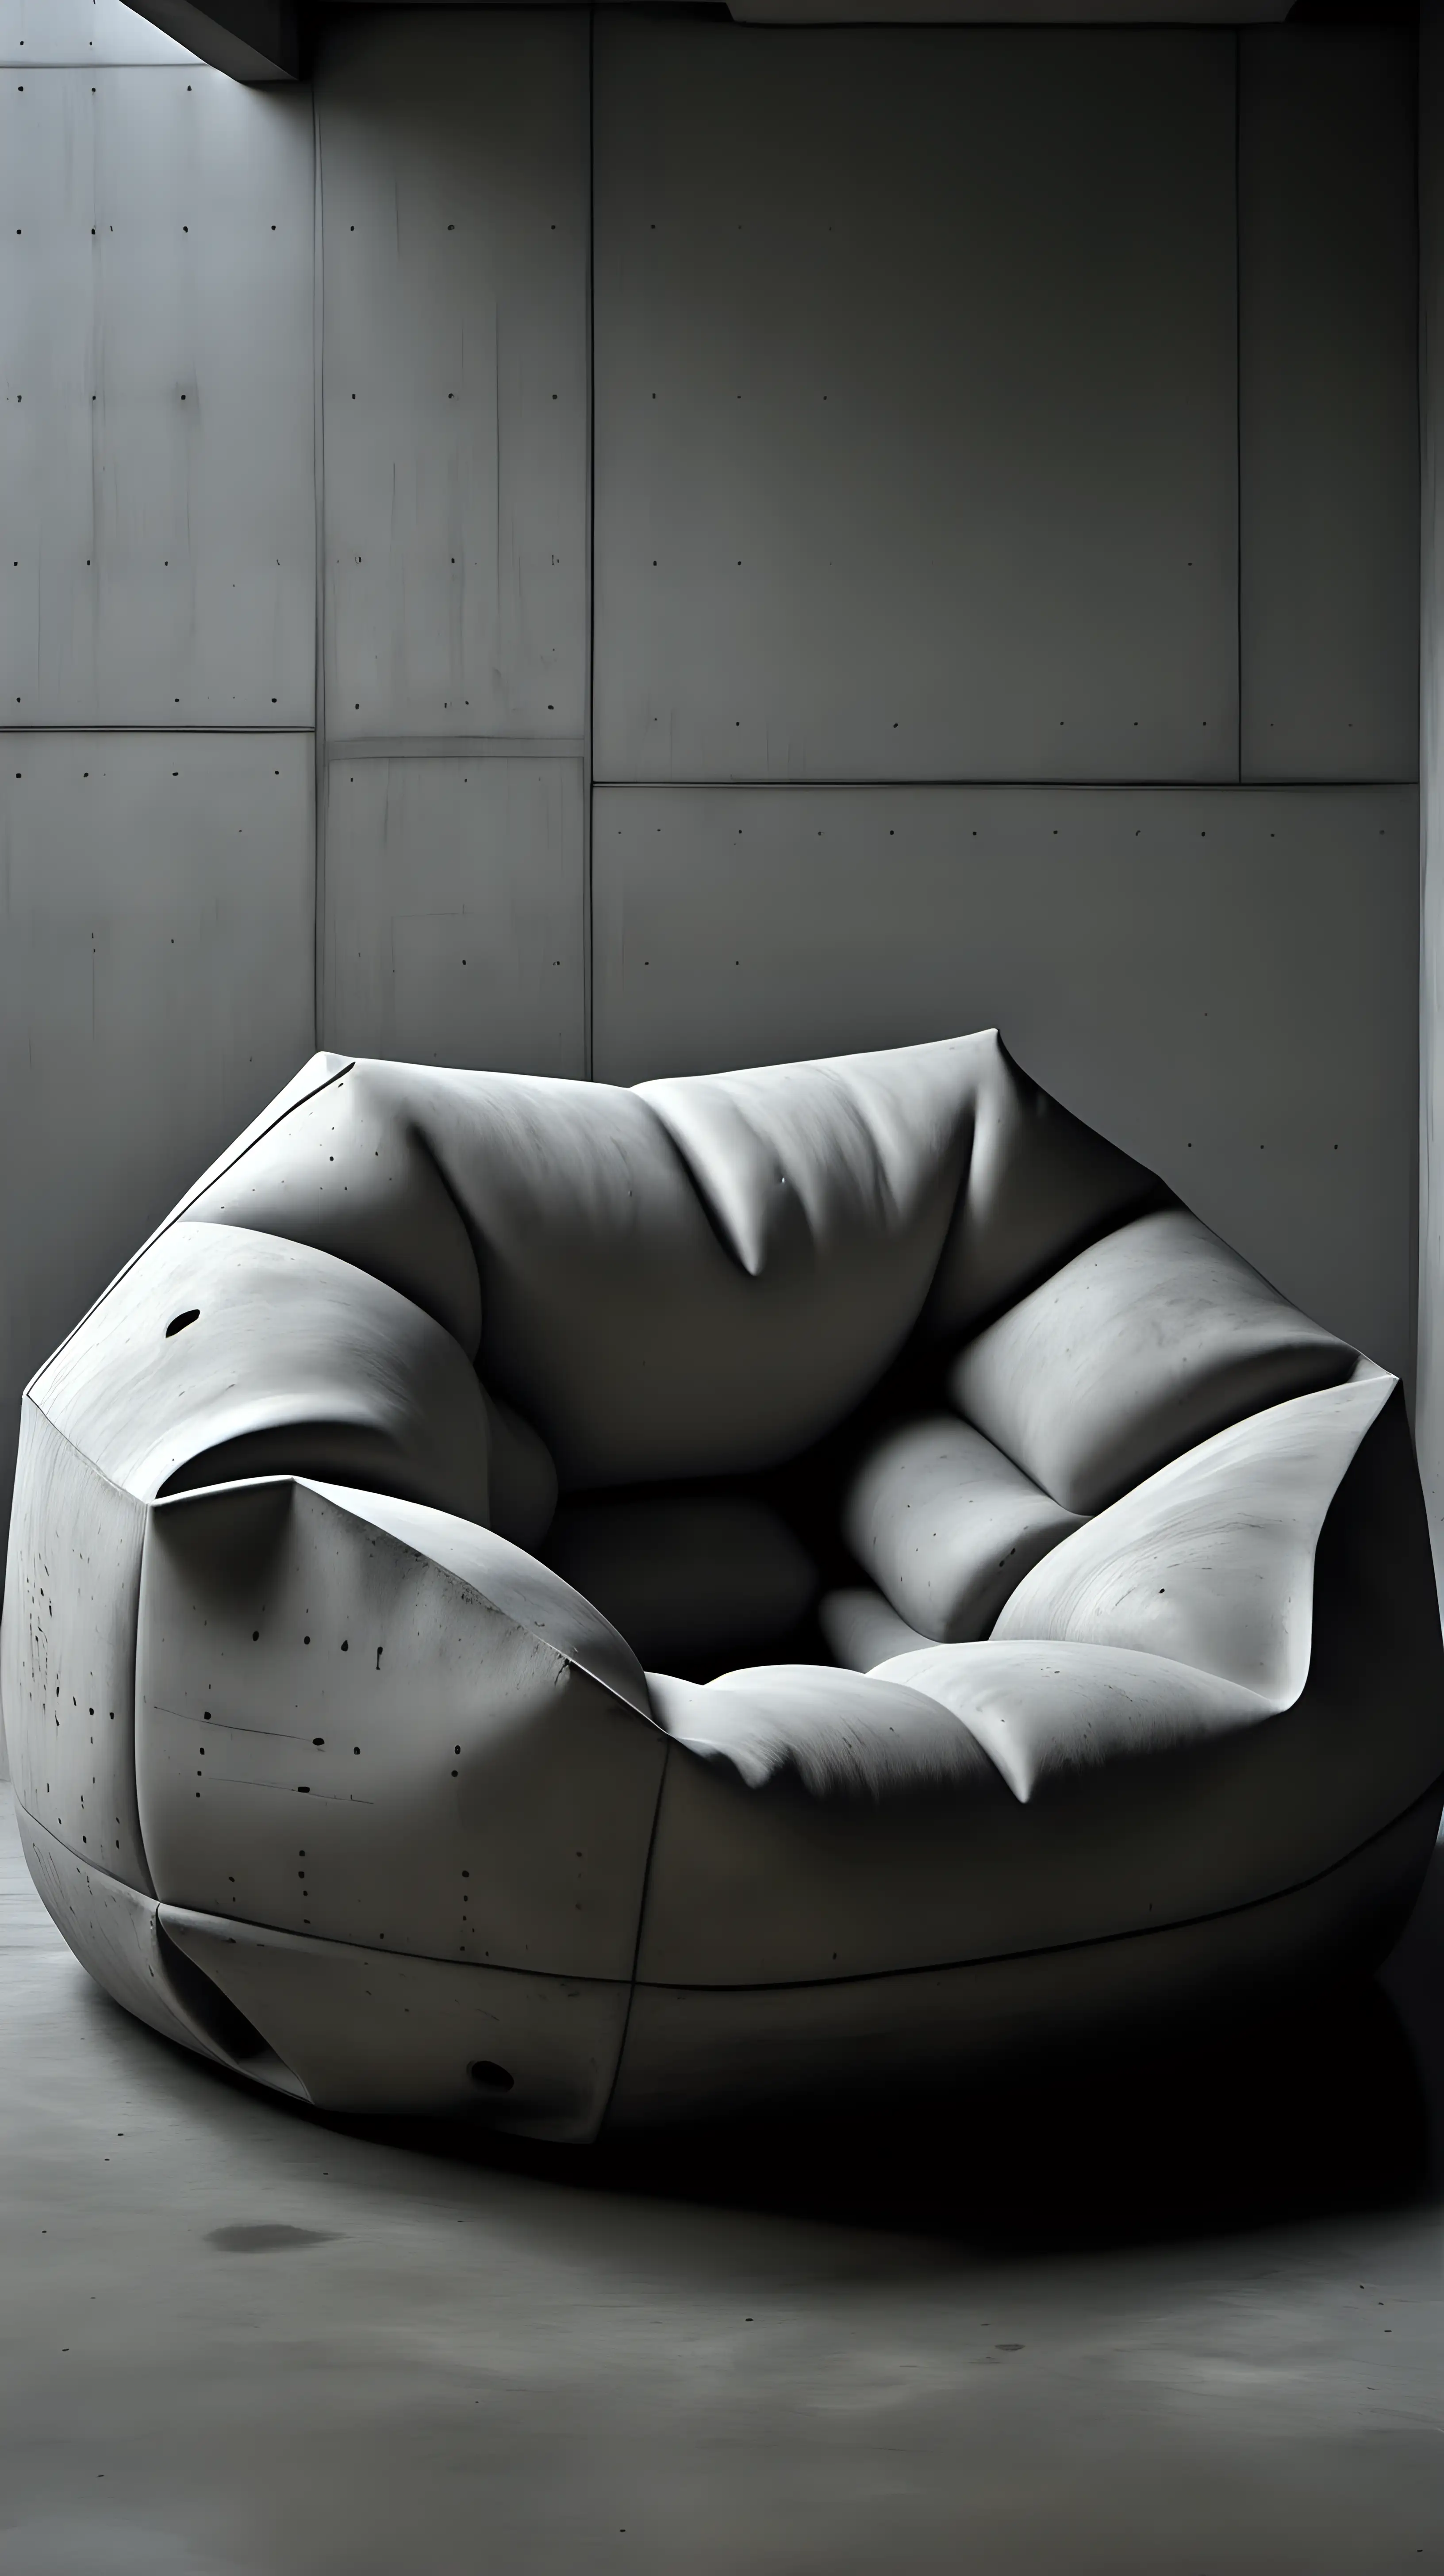 Brutalist Beanbag, a beanbag made of concrete, Brutalist architectural style, stark, utilitarian 